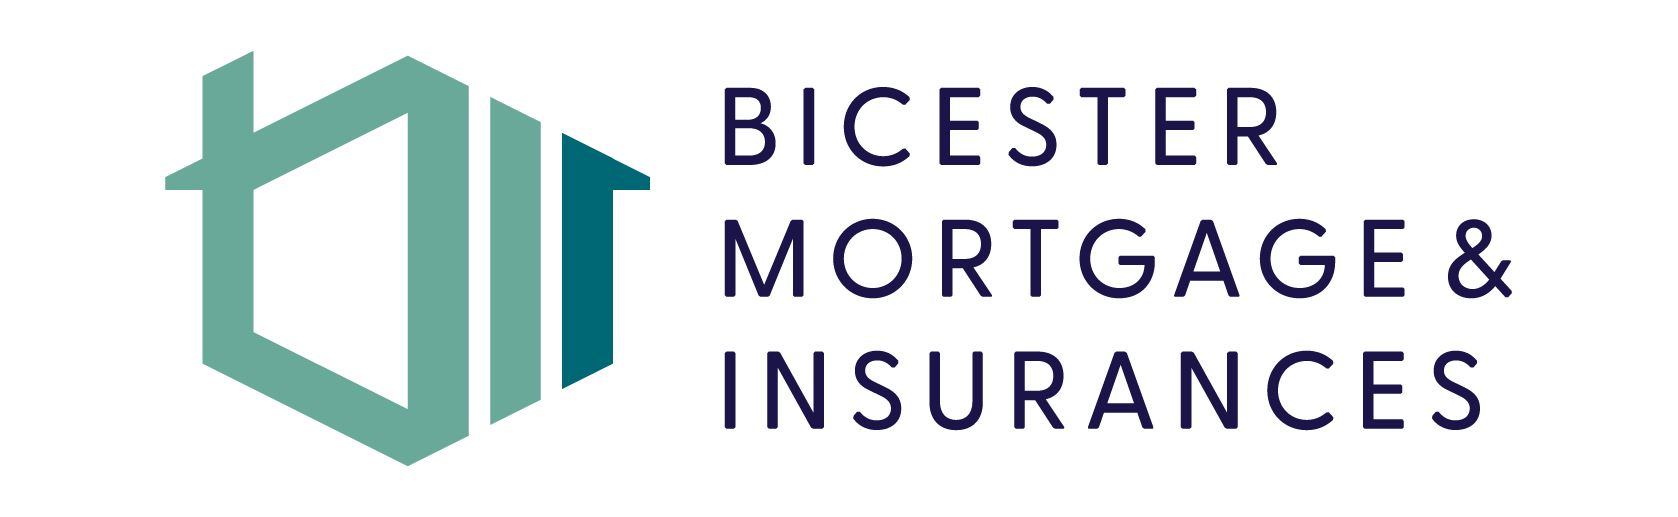 Bicester Mortgage and Insurances